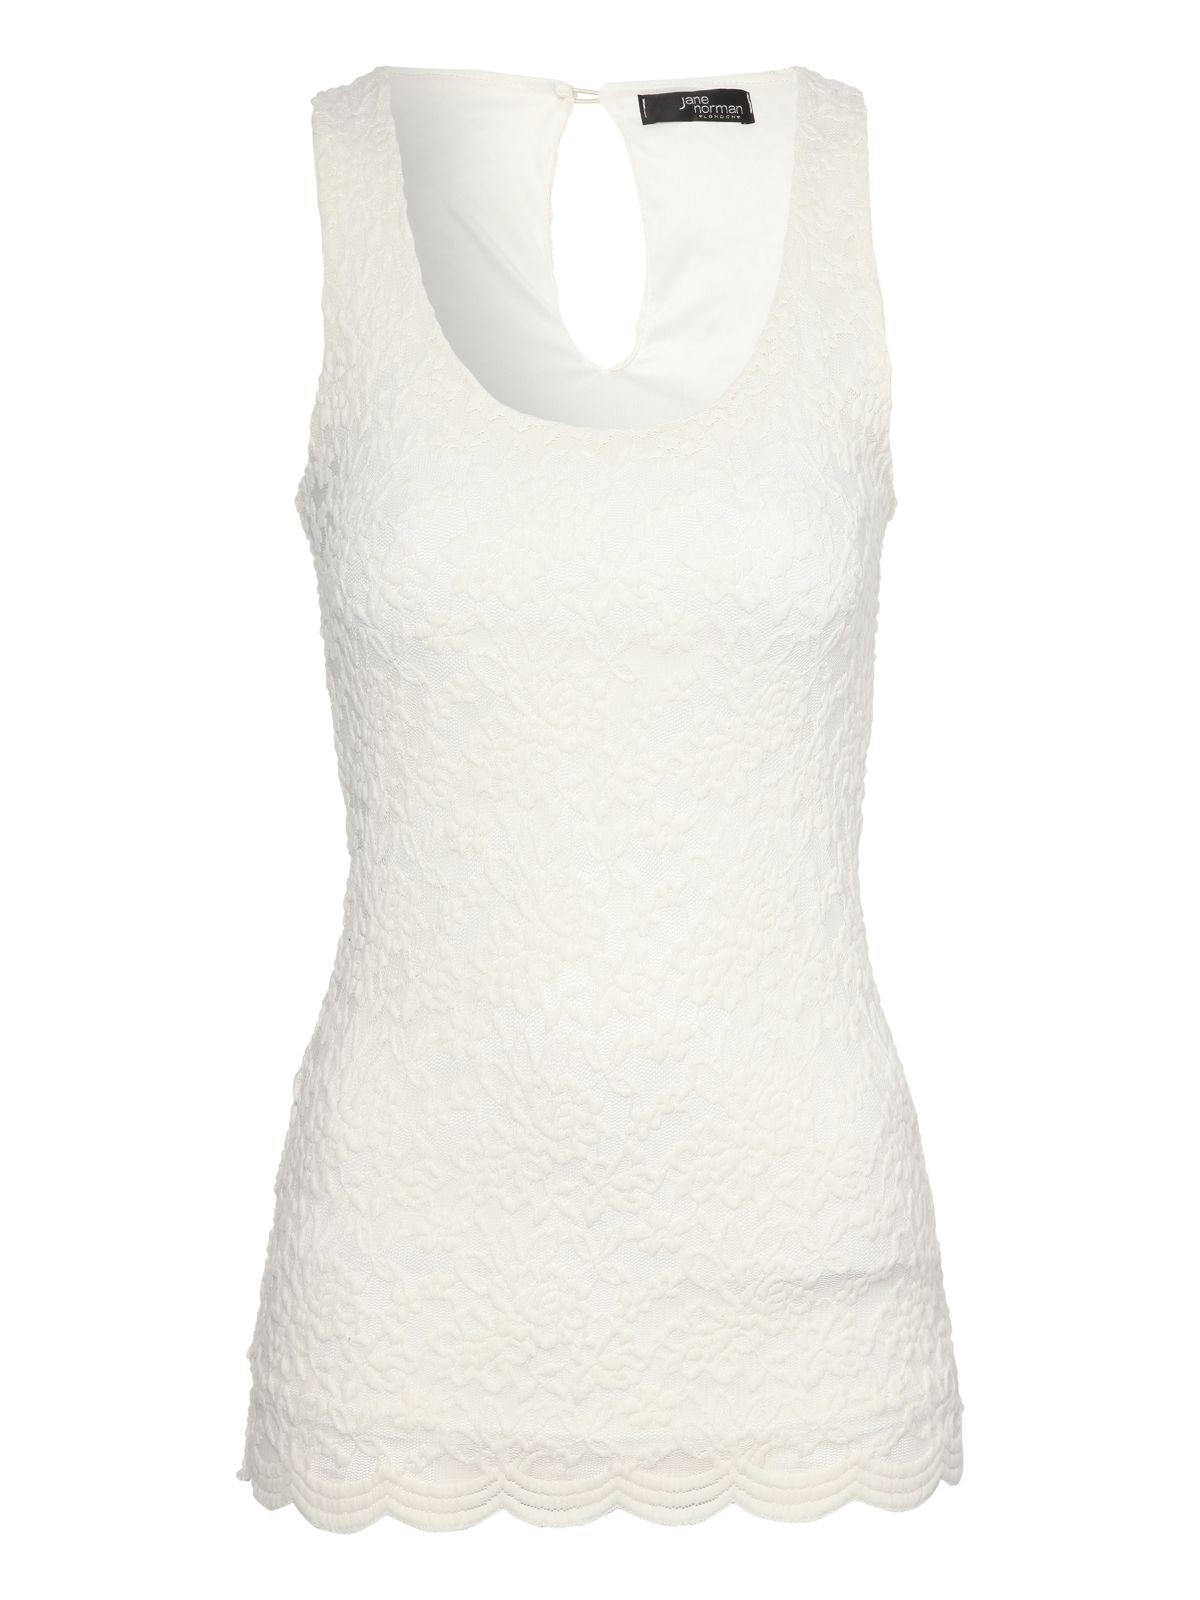 Jane Norman Sleeveless Lace Vest Top in White (Cream) | Lyst